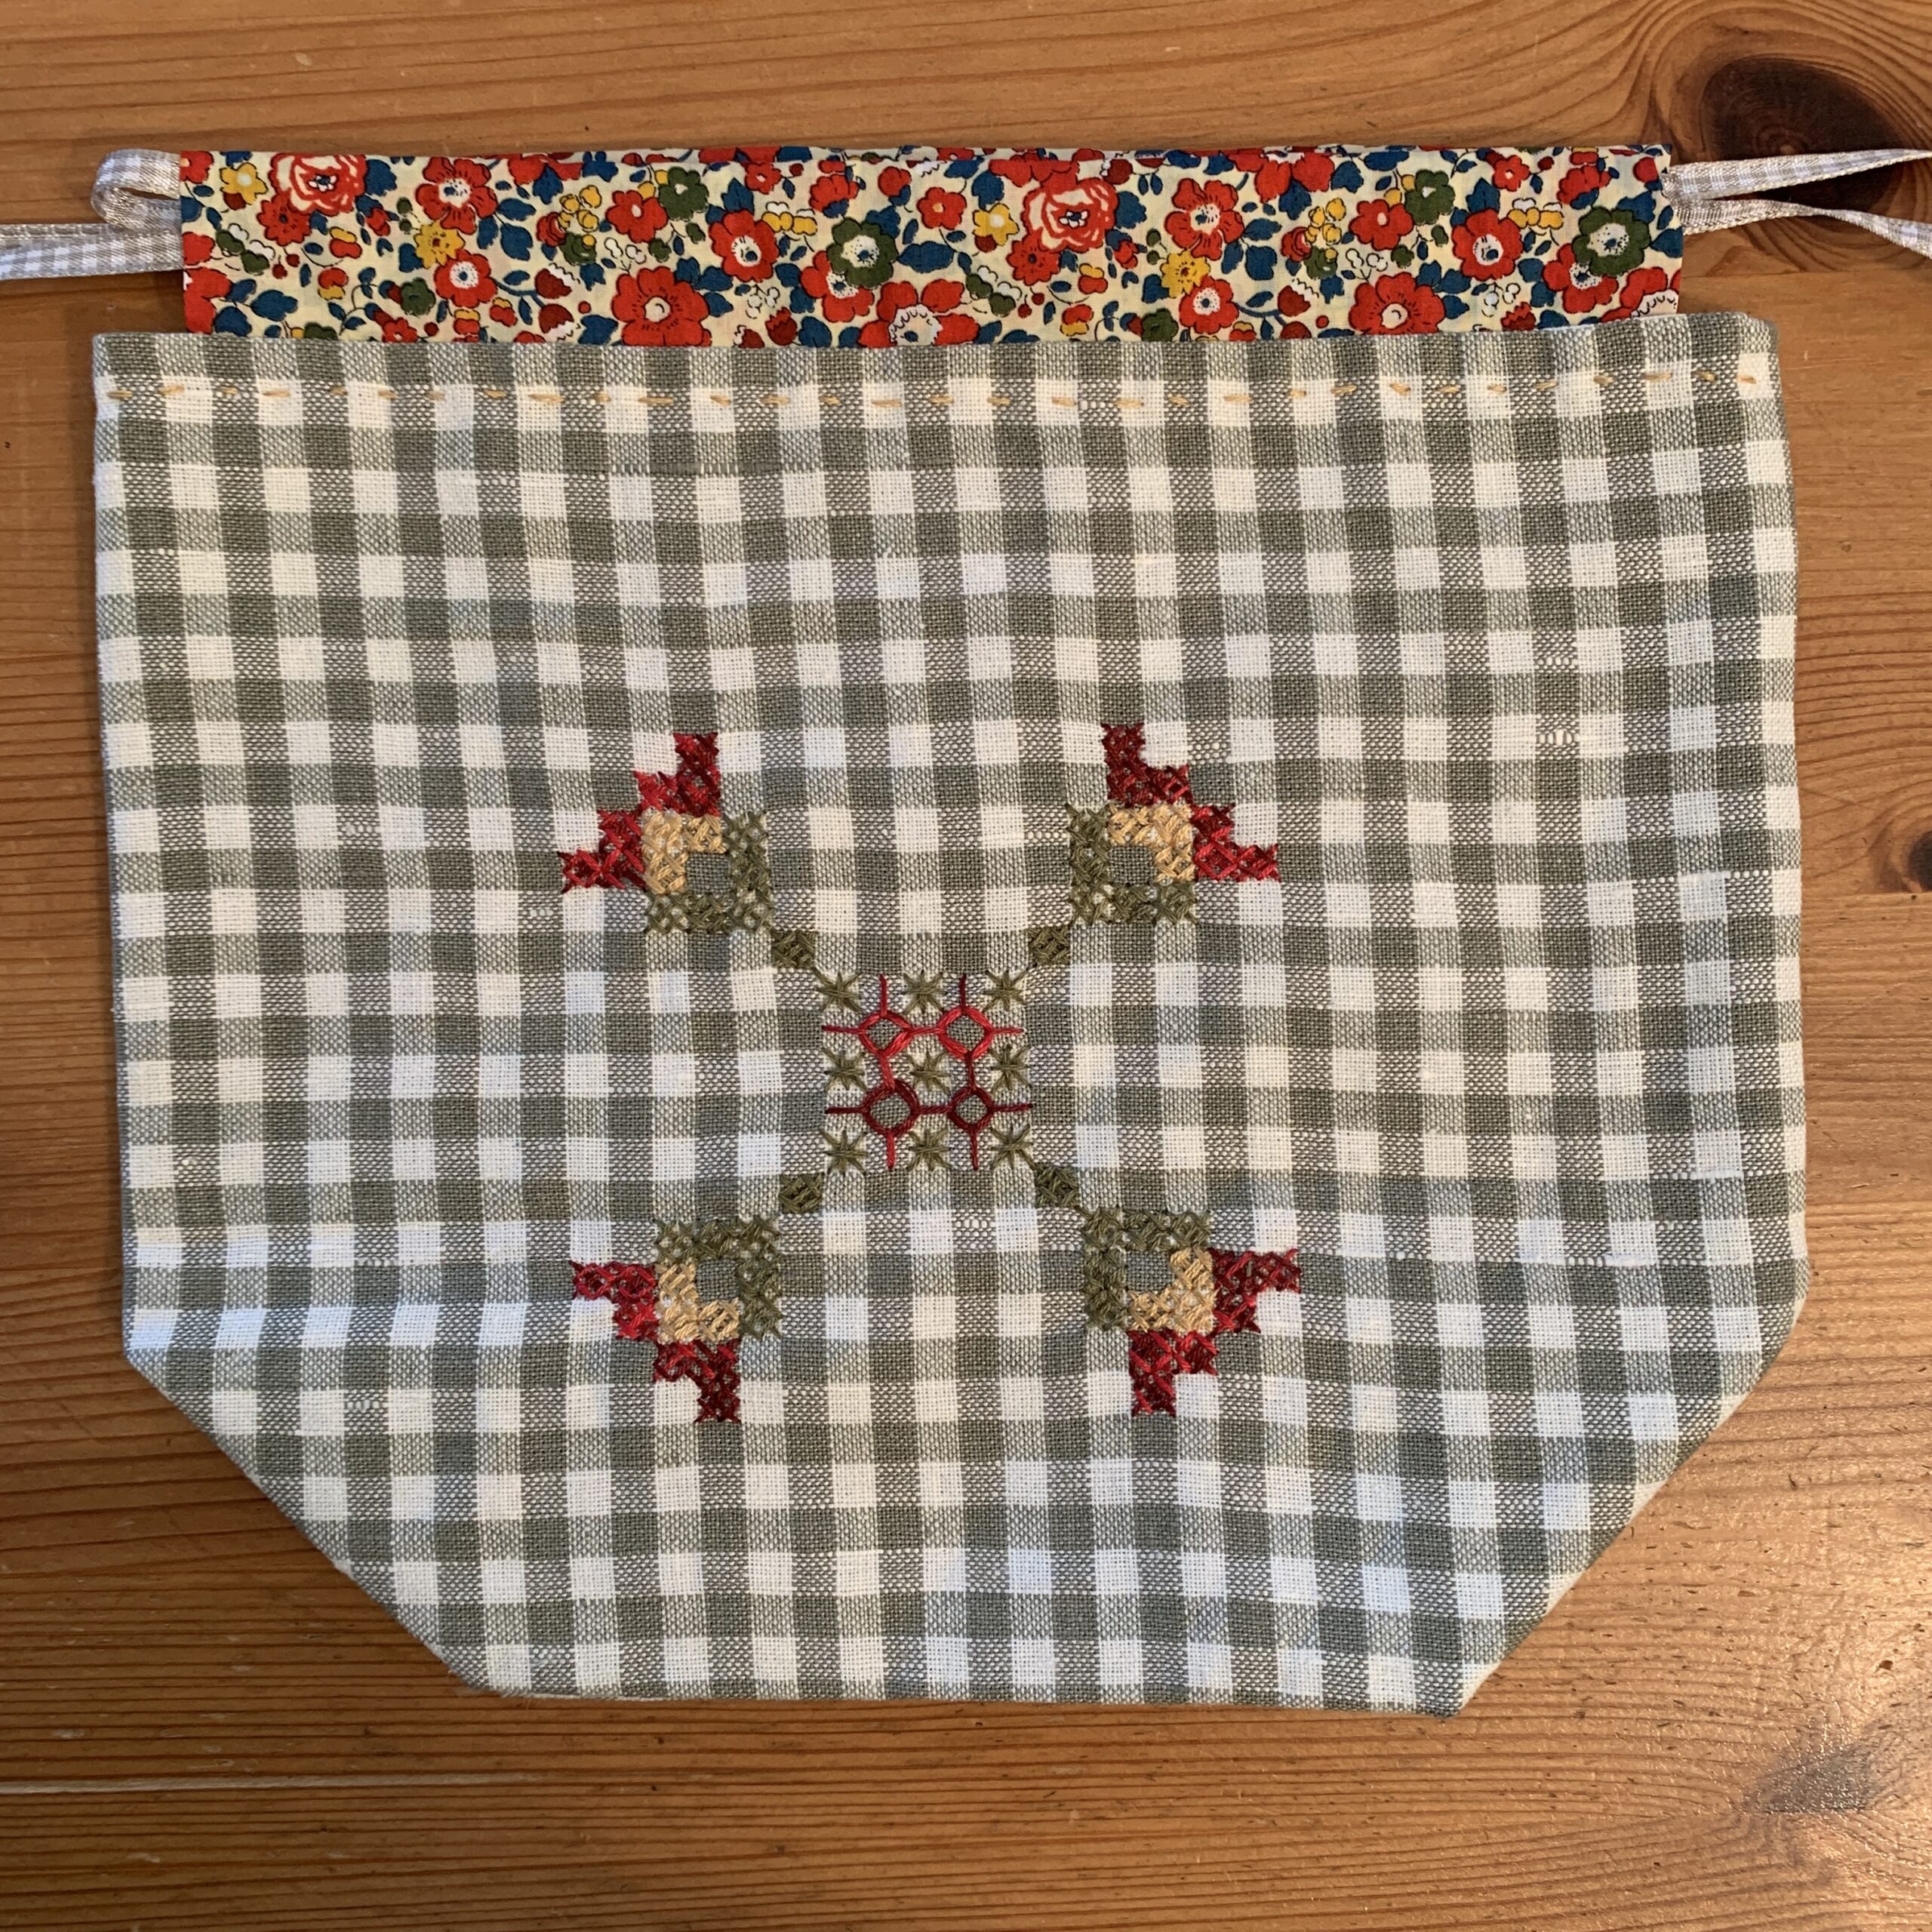 Chicken Scratch Embroidery Bag Workshop with Carolyn Forster